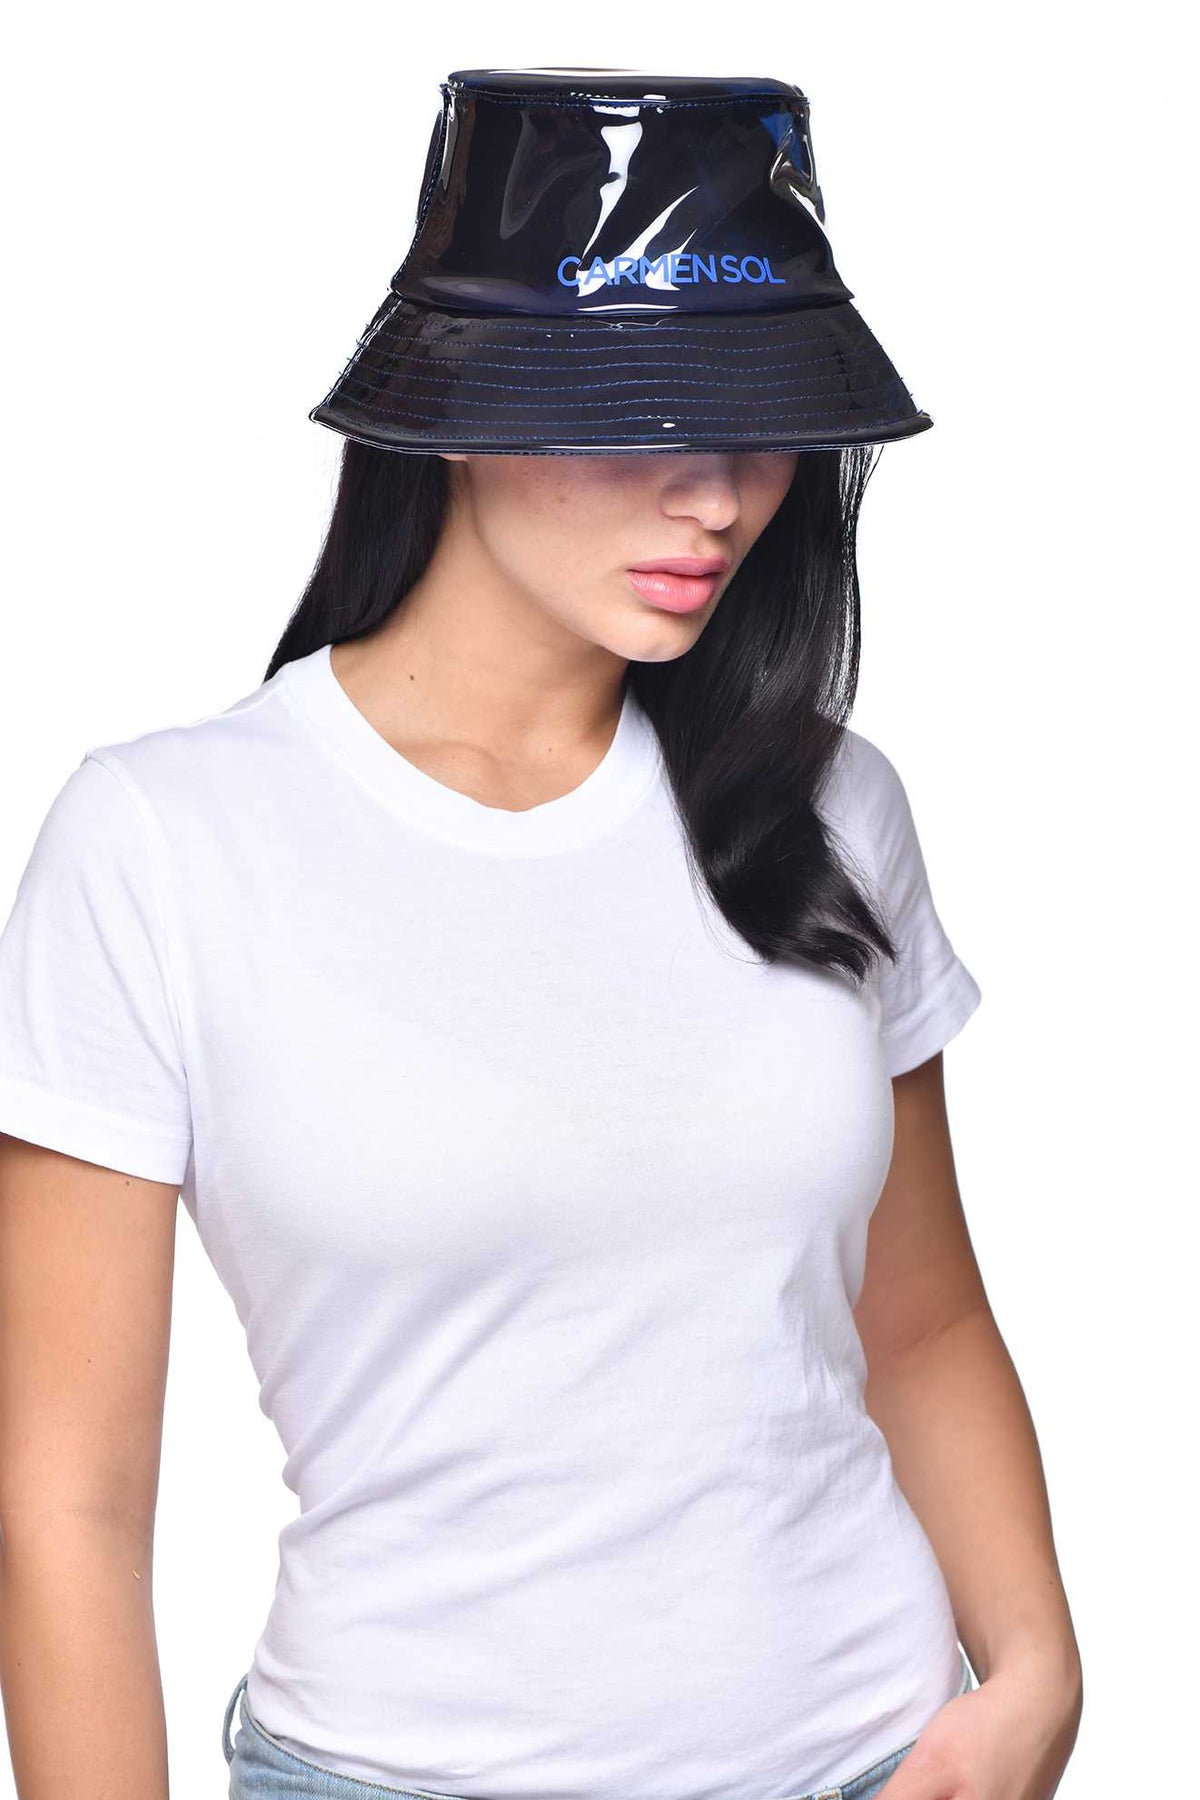 Navy blue Carmen Sol womens outfits with bucket hat 